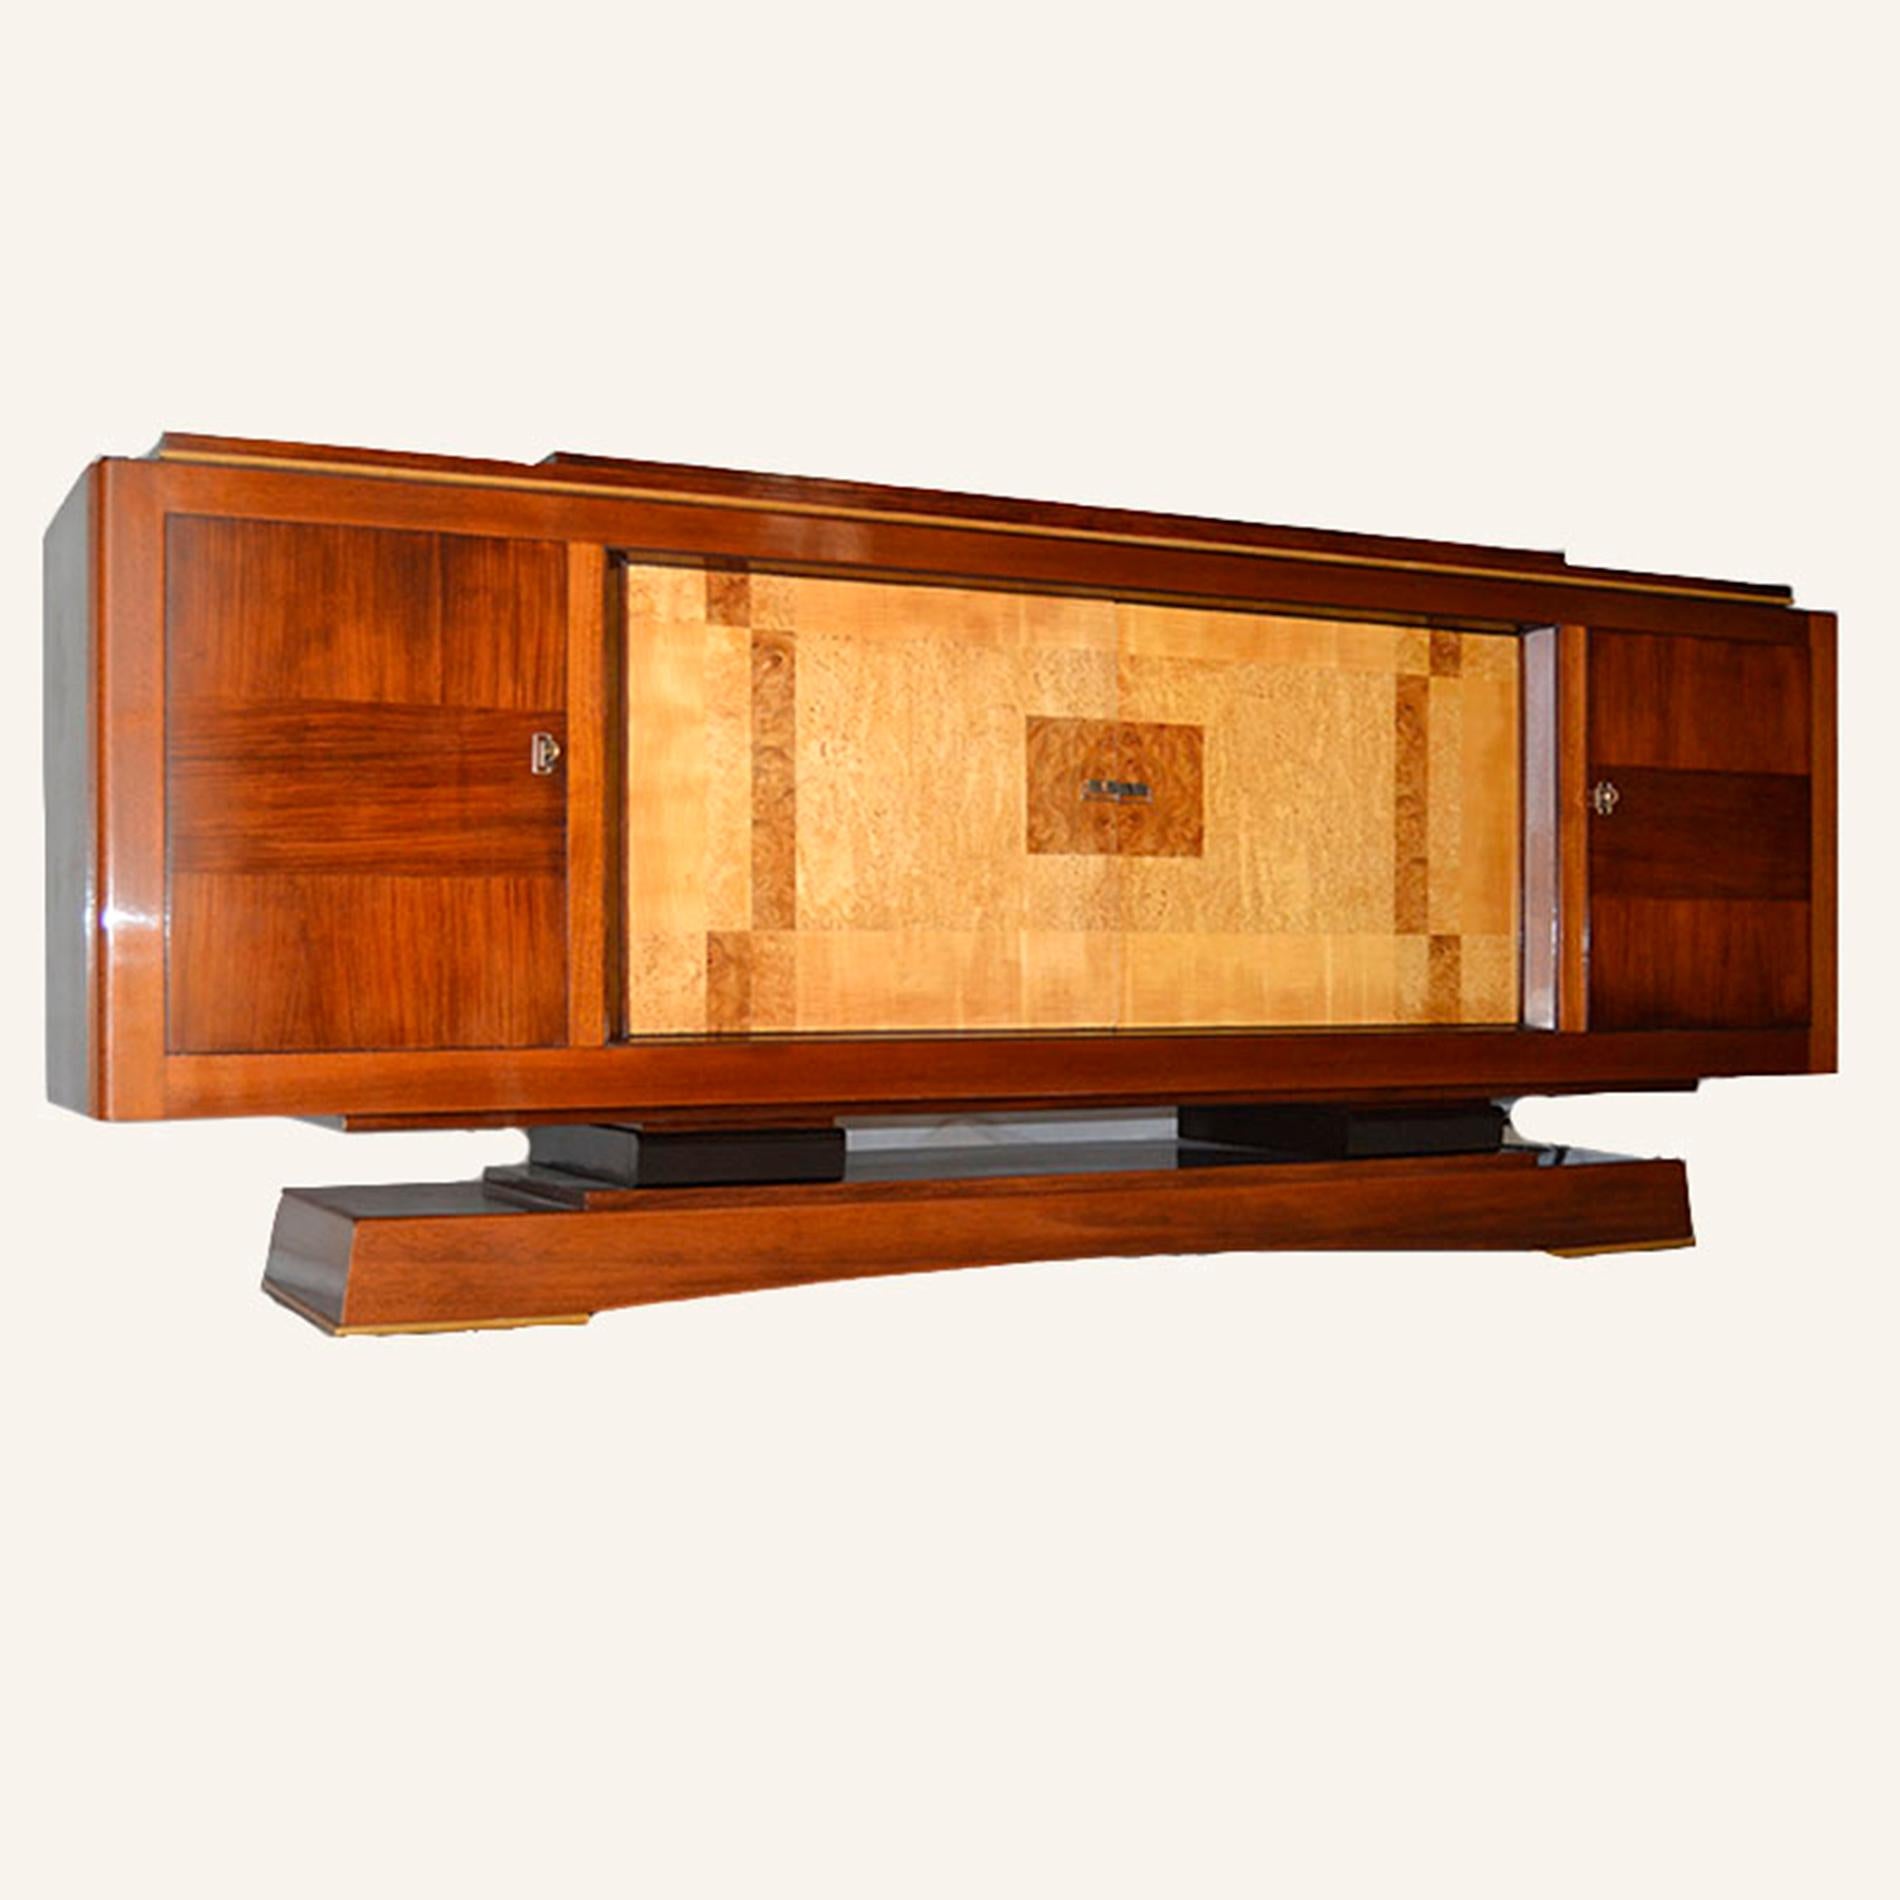 Great buffet attributed to Alfred Porteneuve in Indian rosewood, mahogany and geometric marquetry of different roots (birch, pear and mahogany) in excellent condition, only the gum lacquer restored. Hardware and keys of origin.
Furniture designed